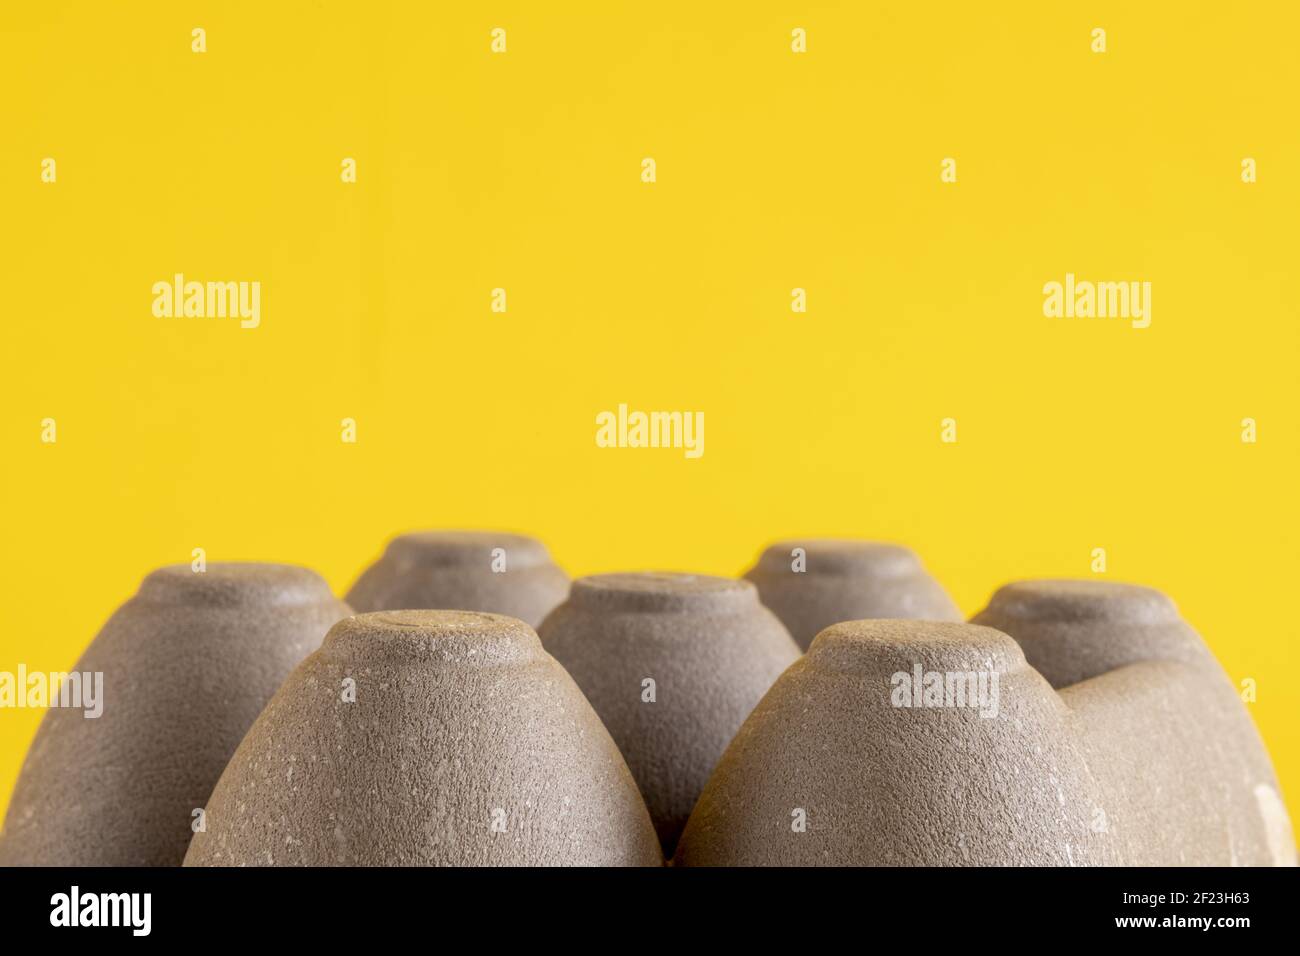 Texture and detail of round shaped upside down egg carton box with plenty of white space above. Stock Photo